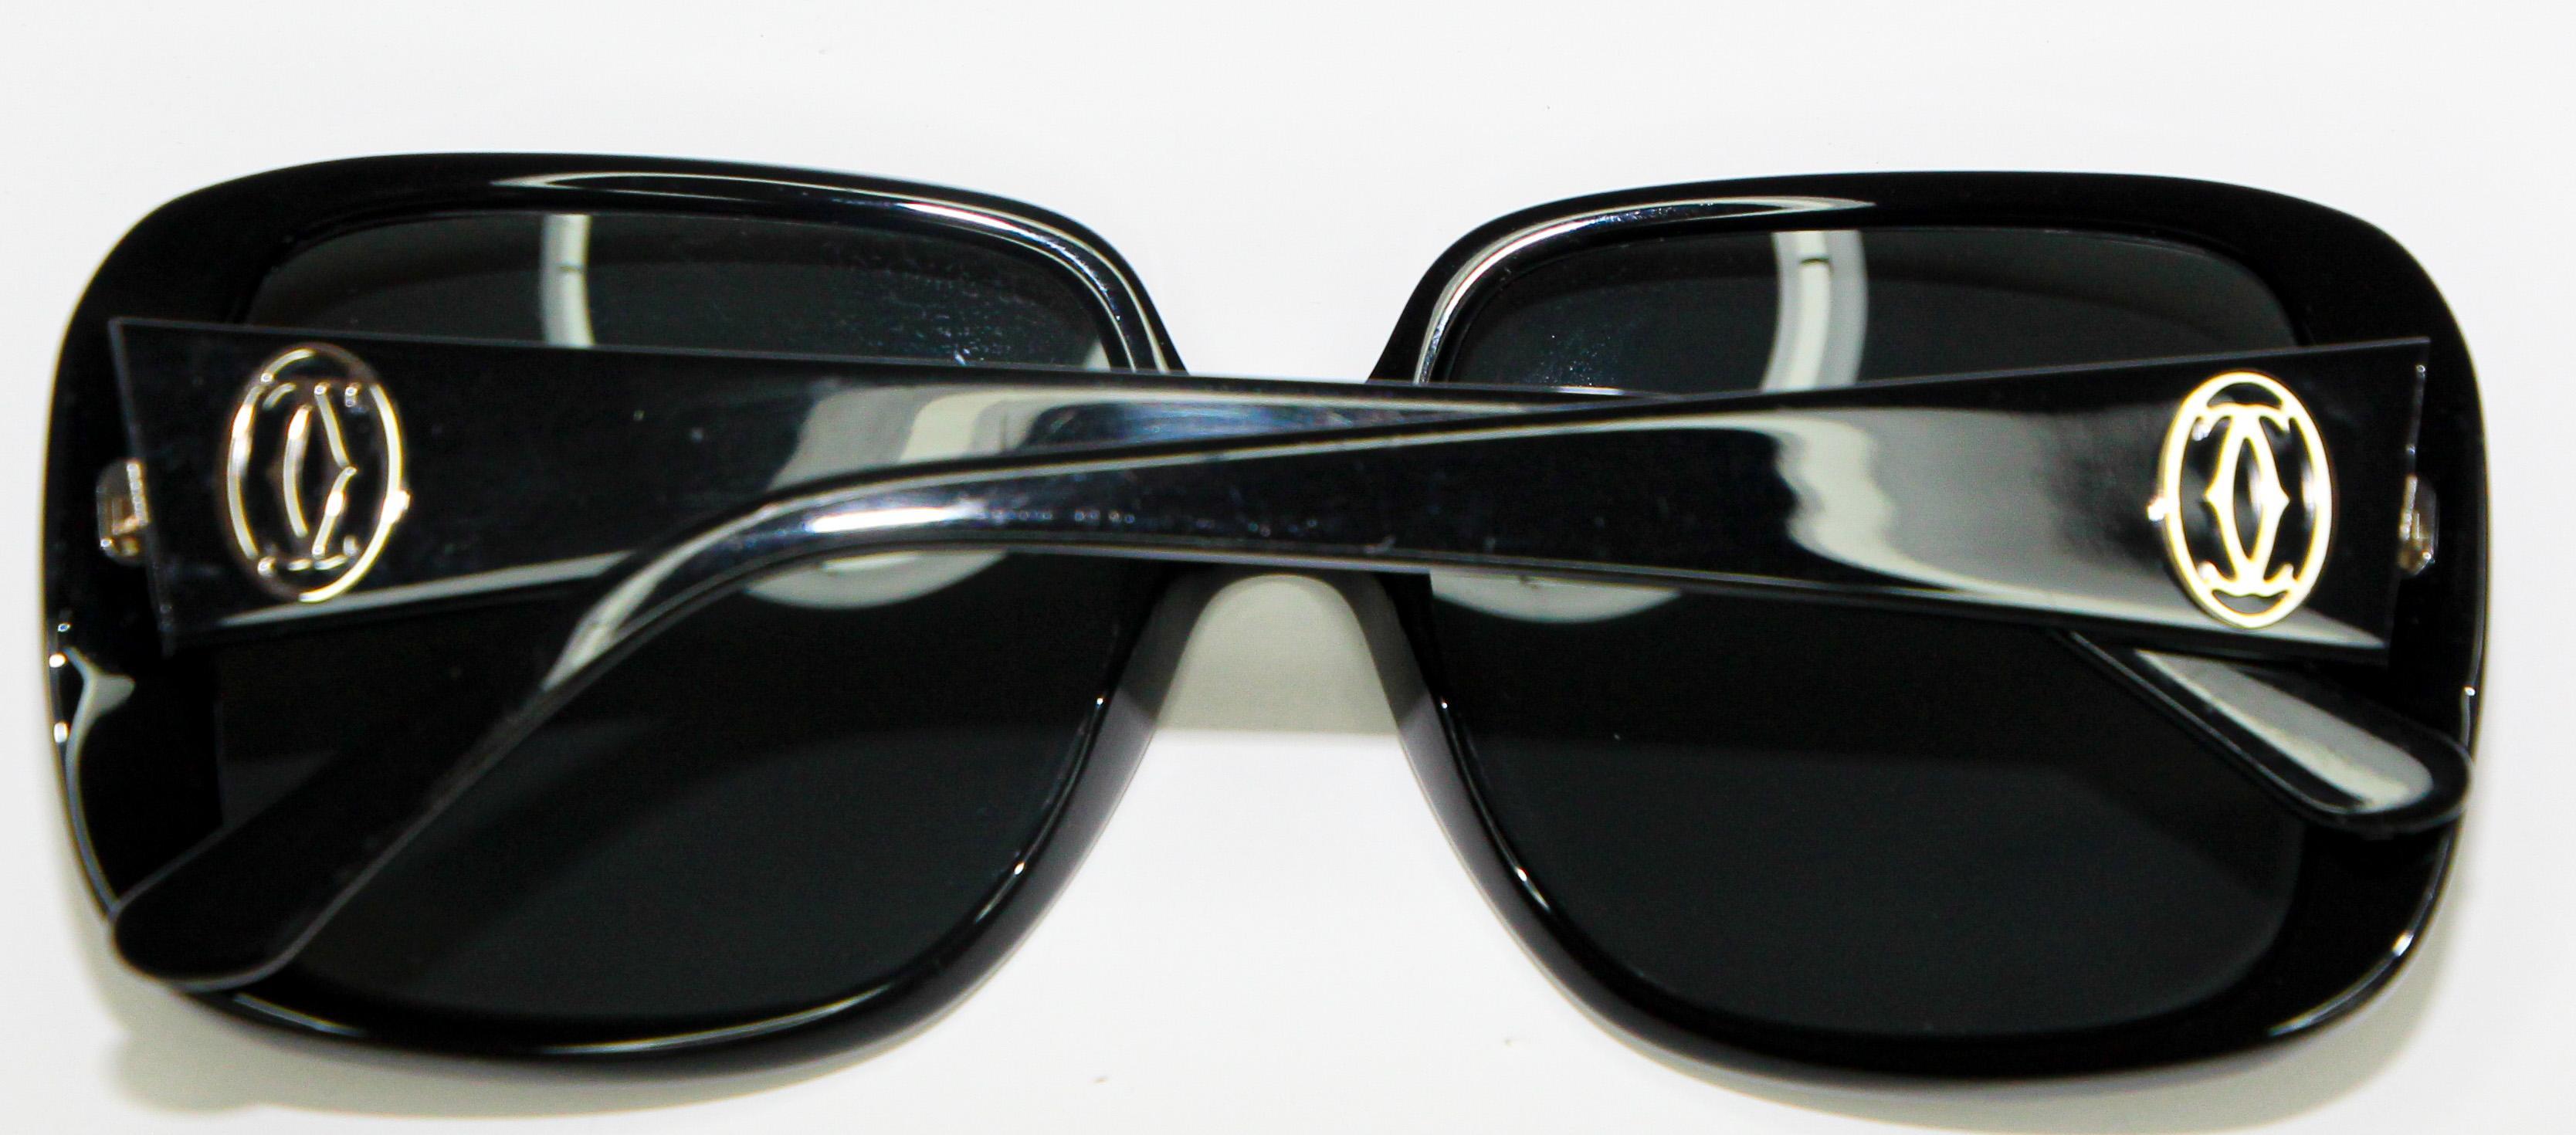 1990s Cartier Vintage Sunglasses Black with Silver Logo For Sale 7